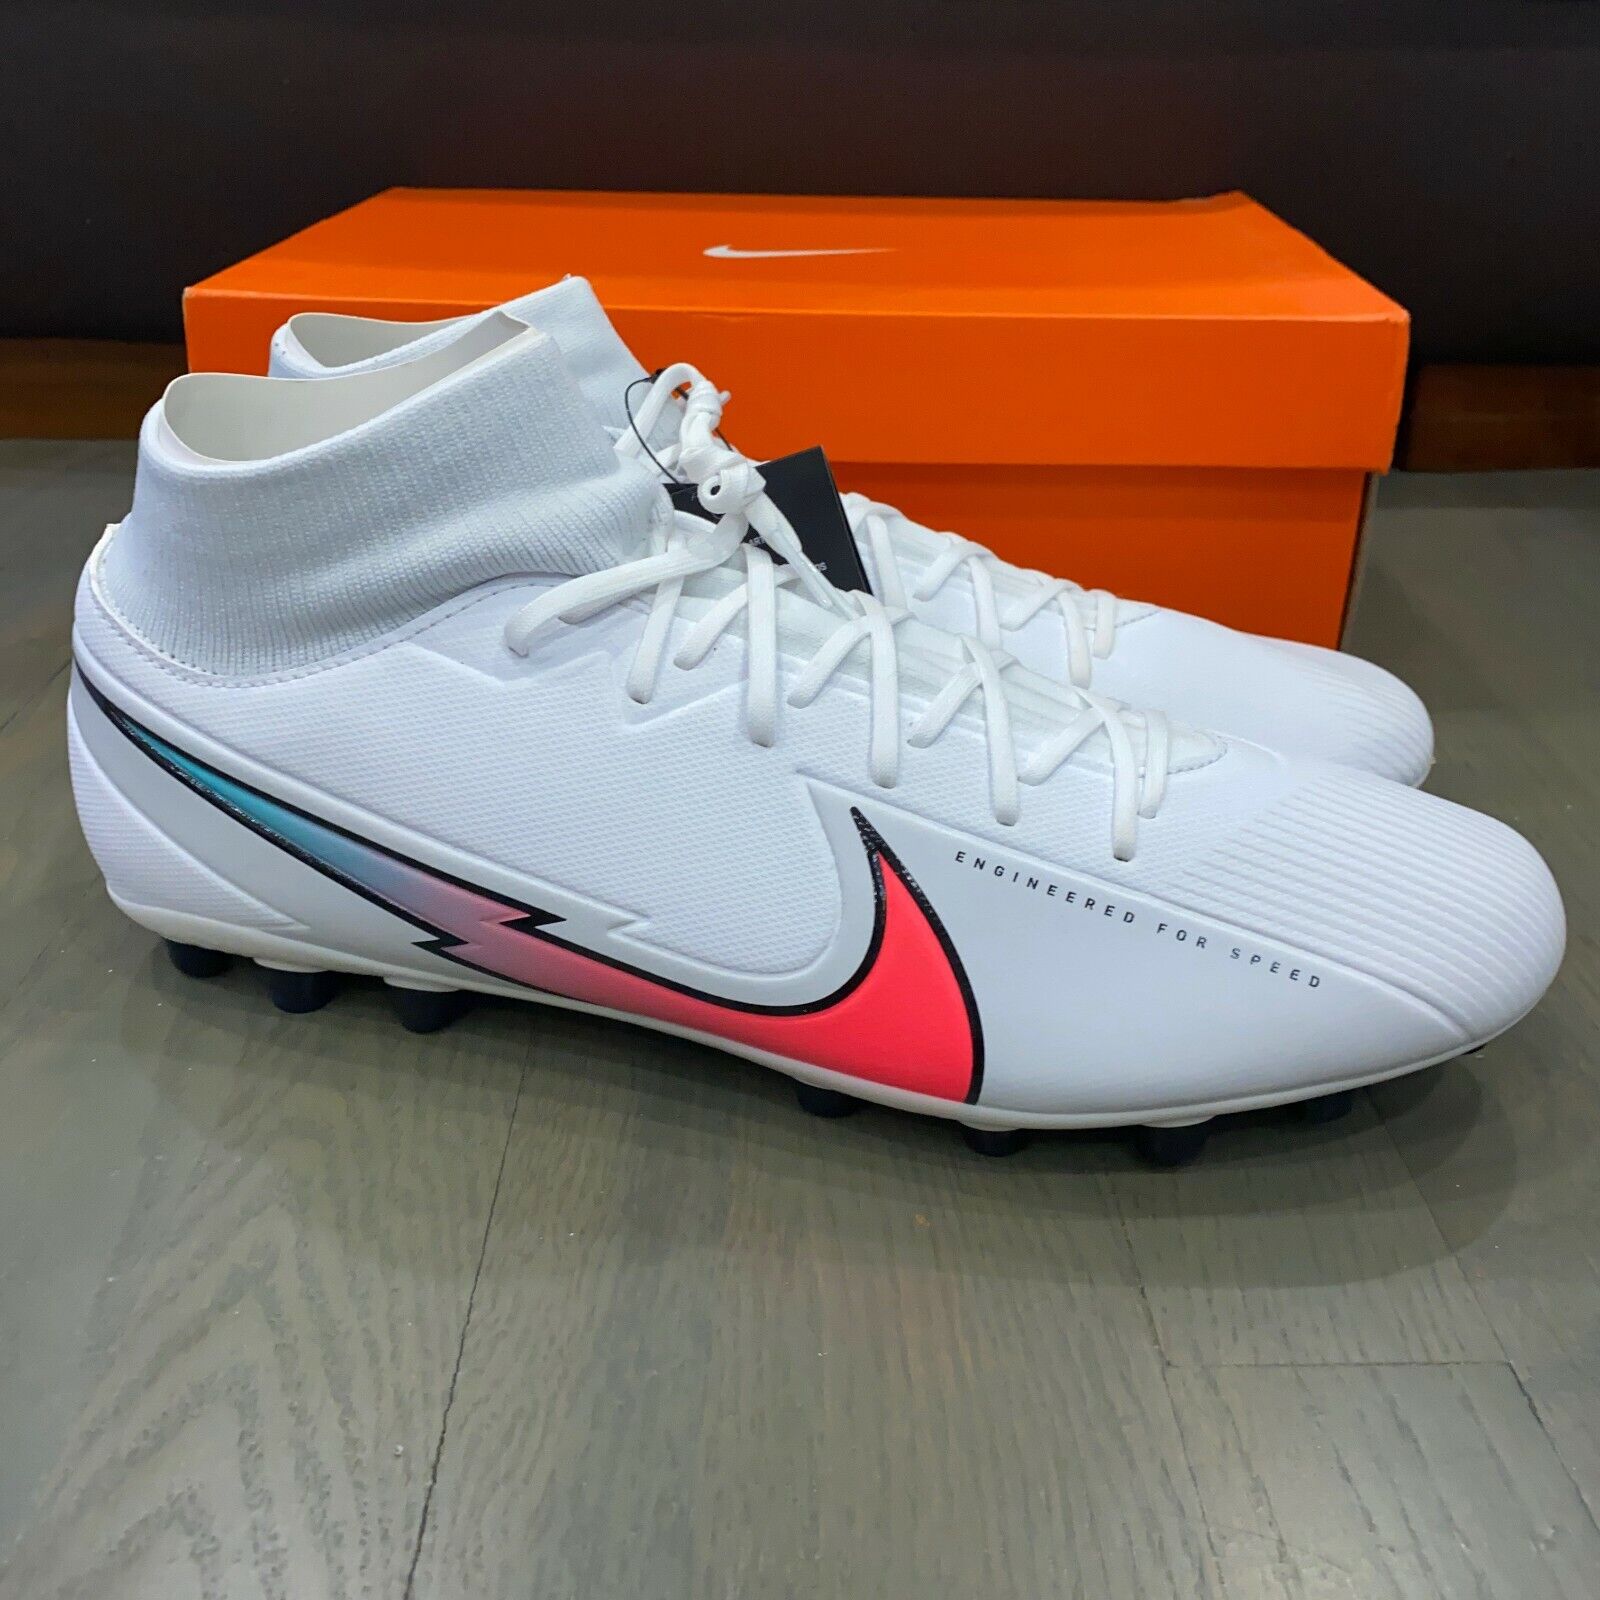 Nike Mercurial Superfly FG/MG Soccer Futball Cleats Size 9 AT7946-163 |